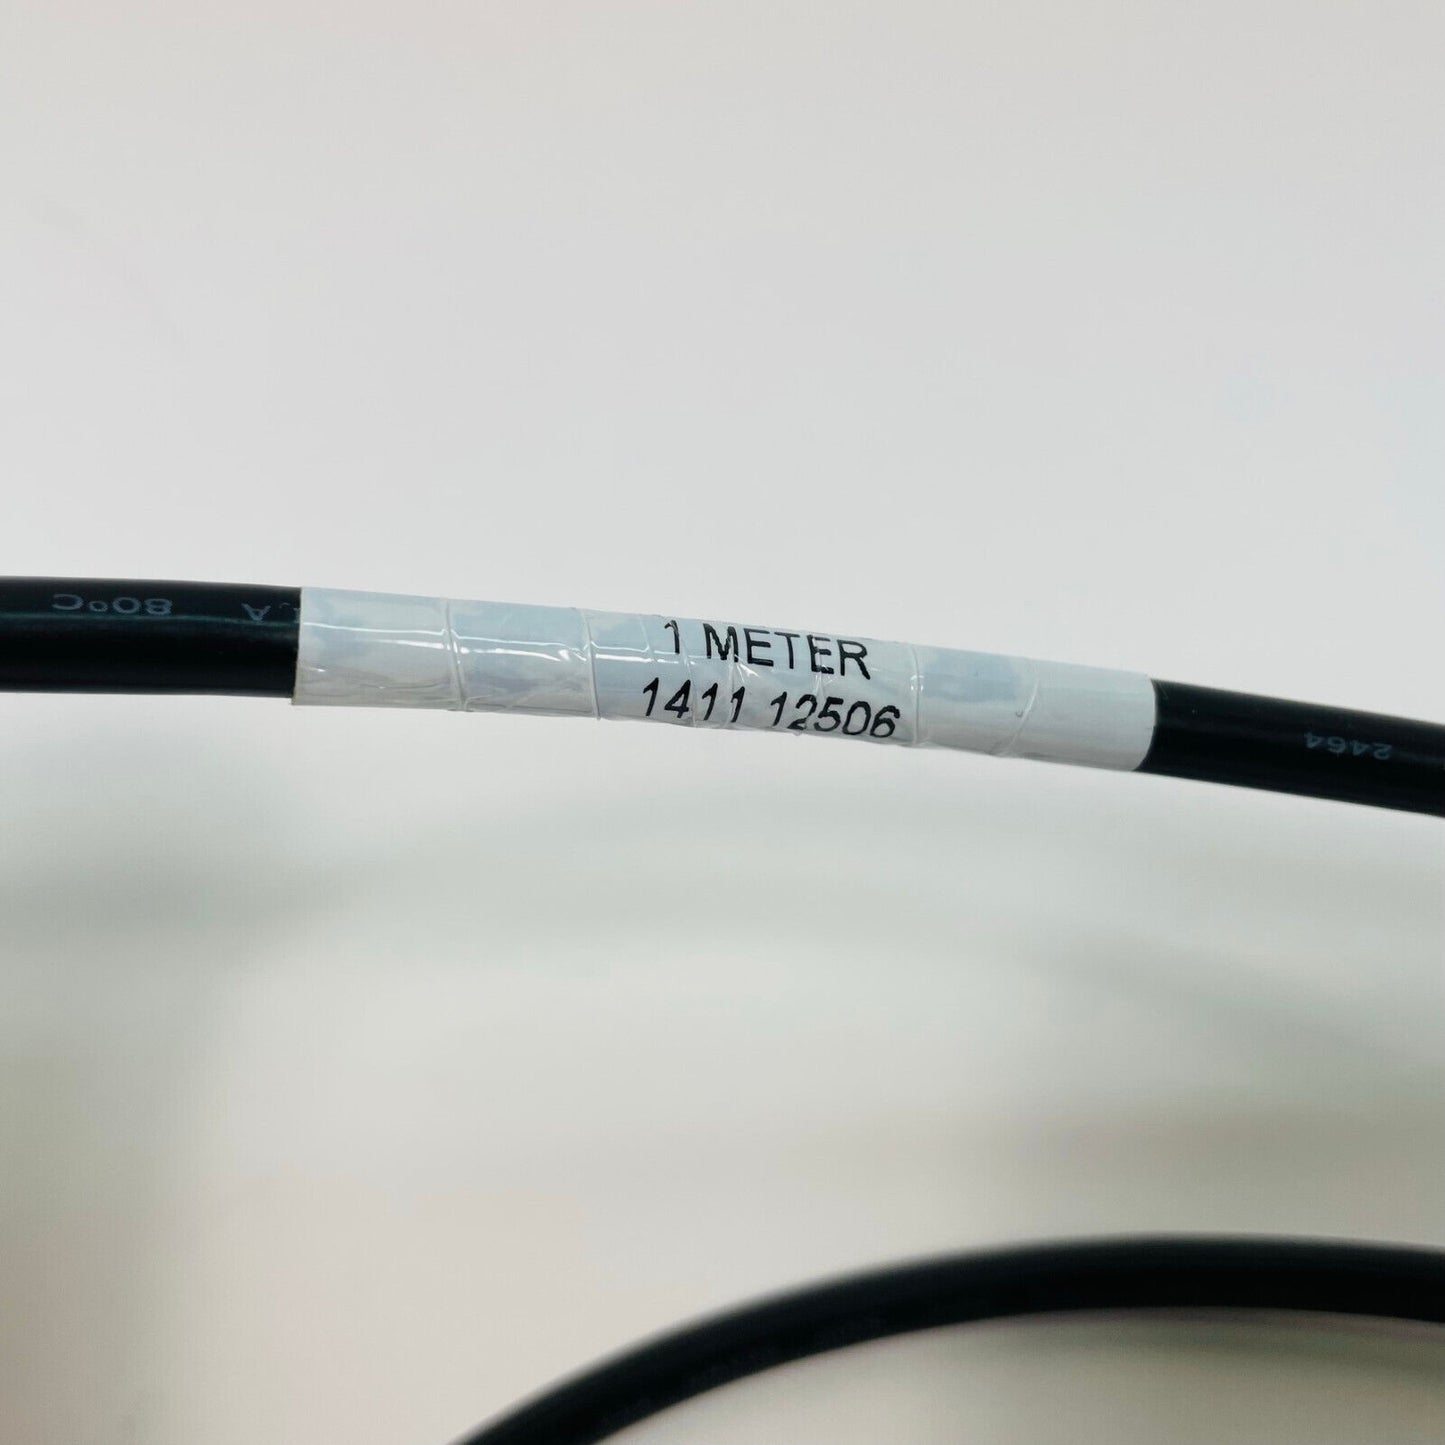 New NATIONAL INSTRUMENTS 182845C-01   10 MOD TO 9 DSUB CABLE